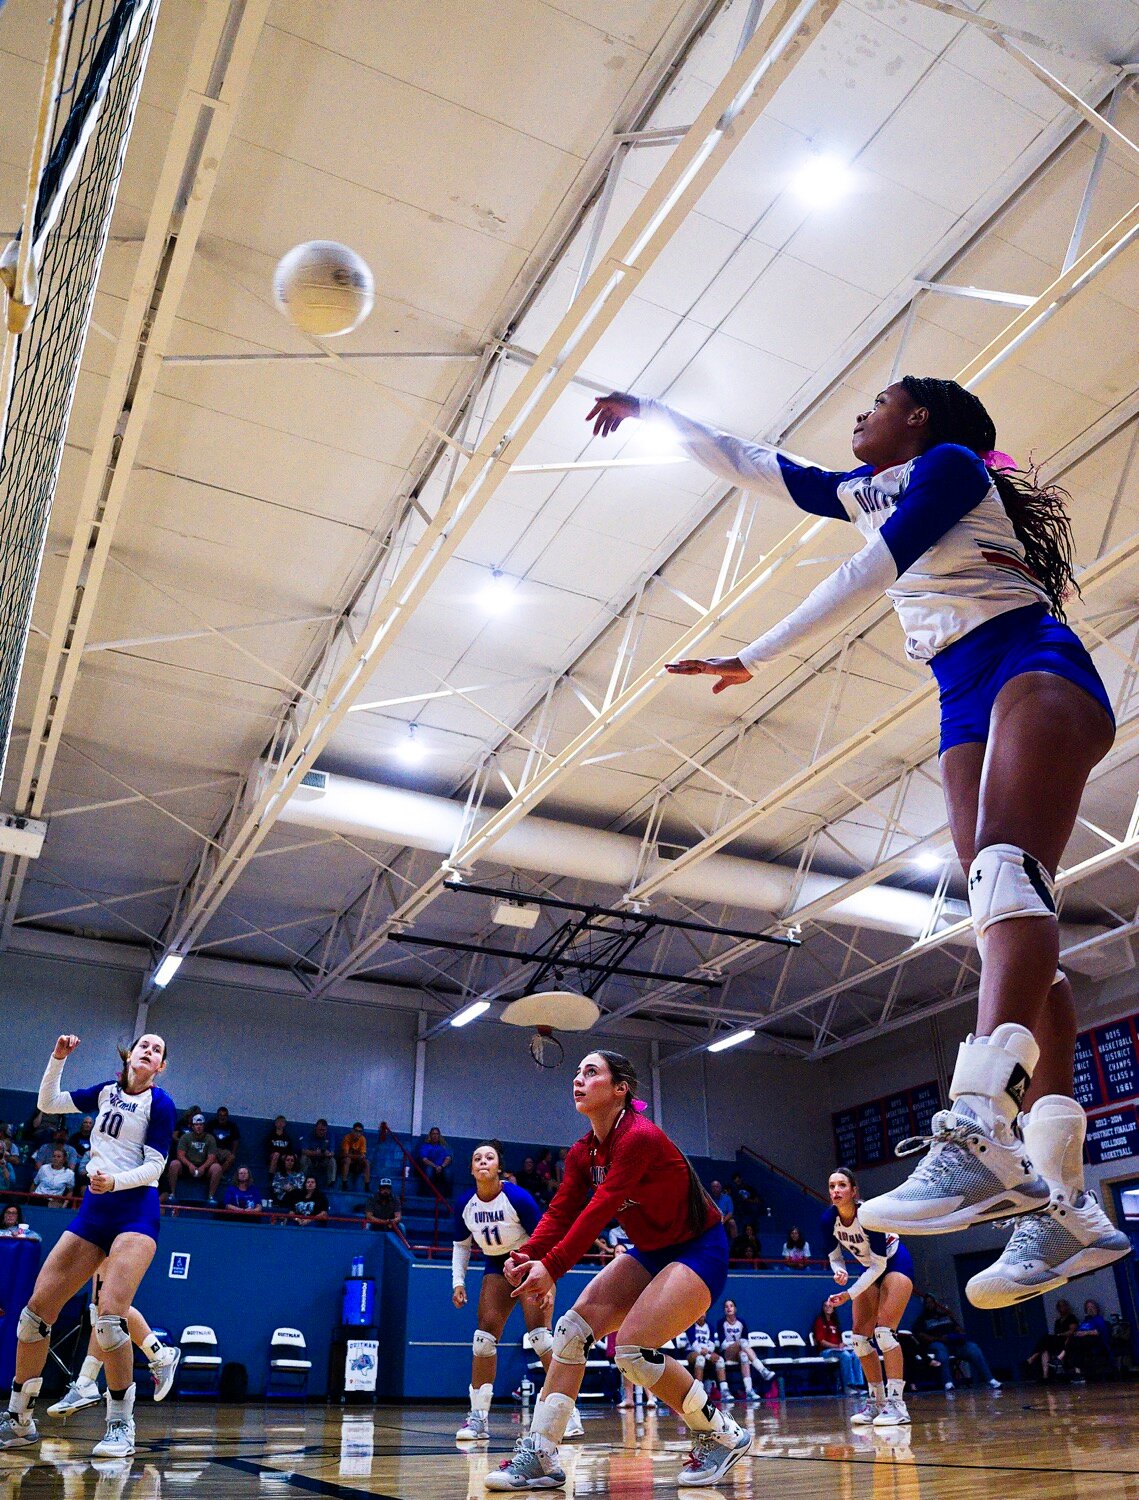 Allie Berry sends the ball over the net. [view more volleyball]